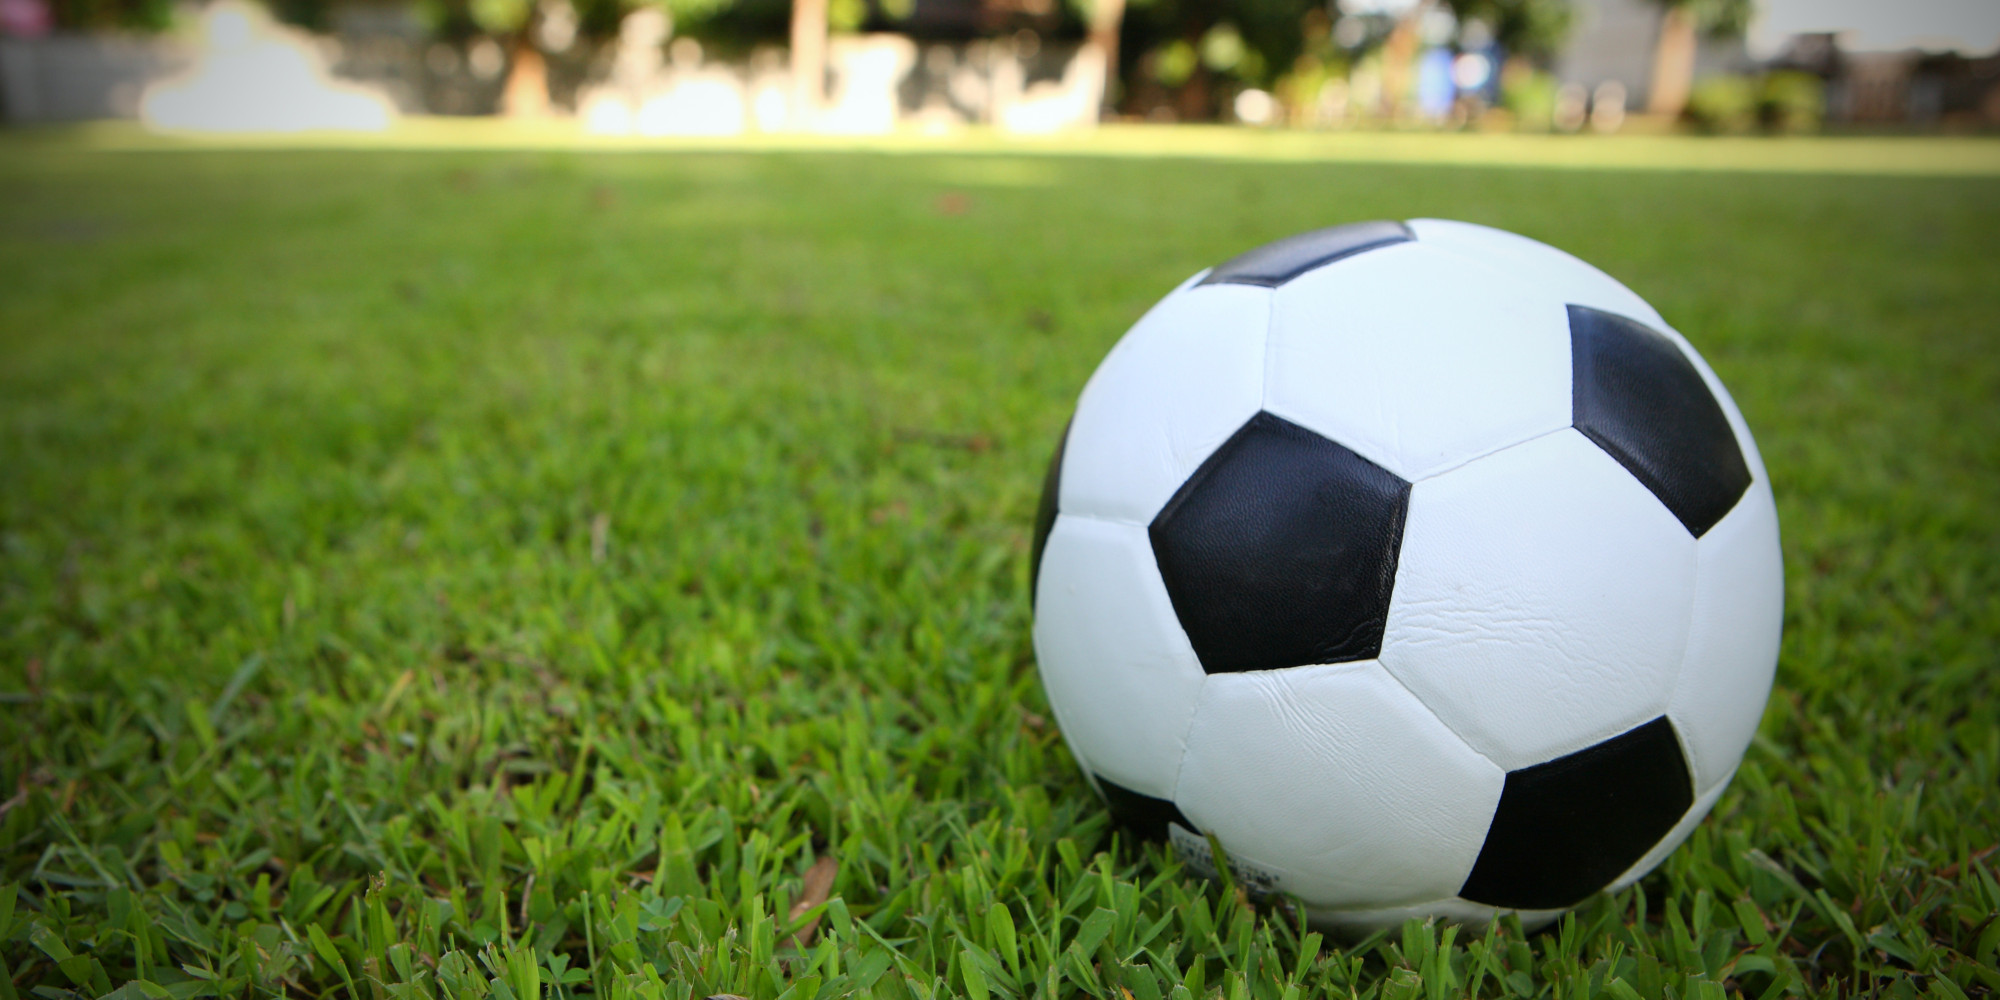 Intramural Soccer | College Admission at Loyola